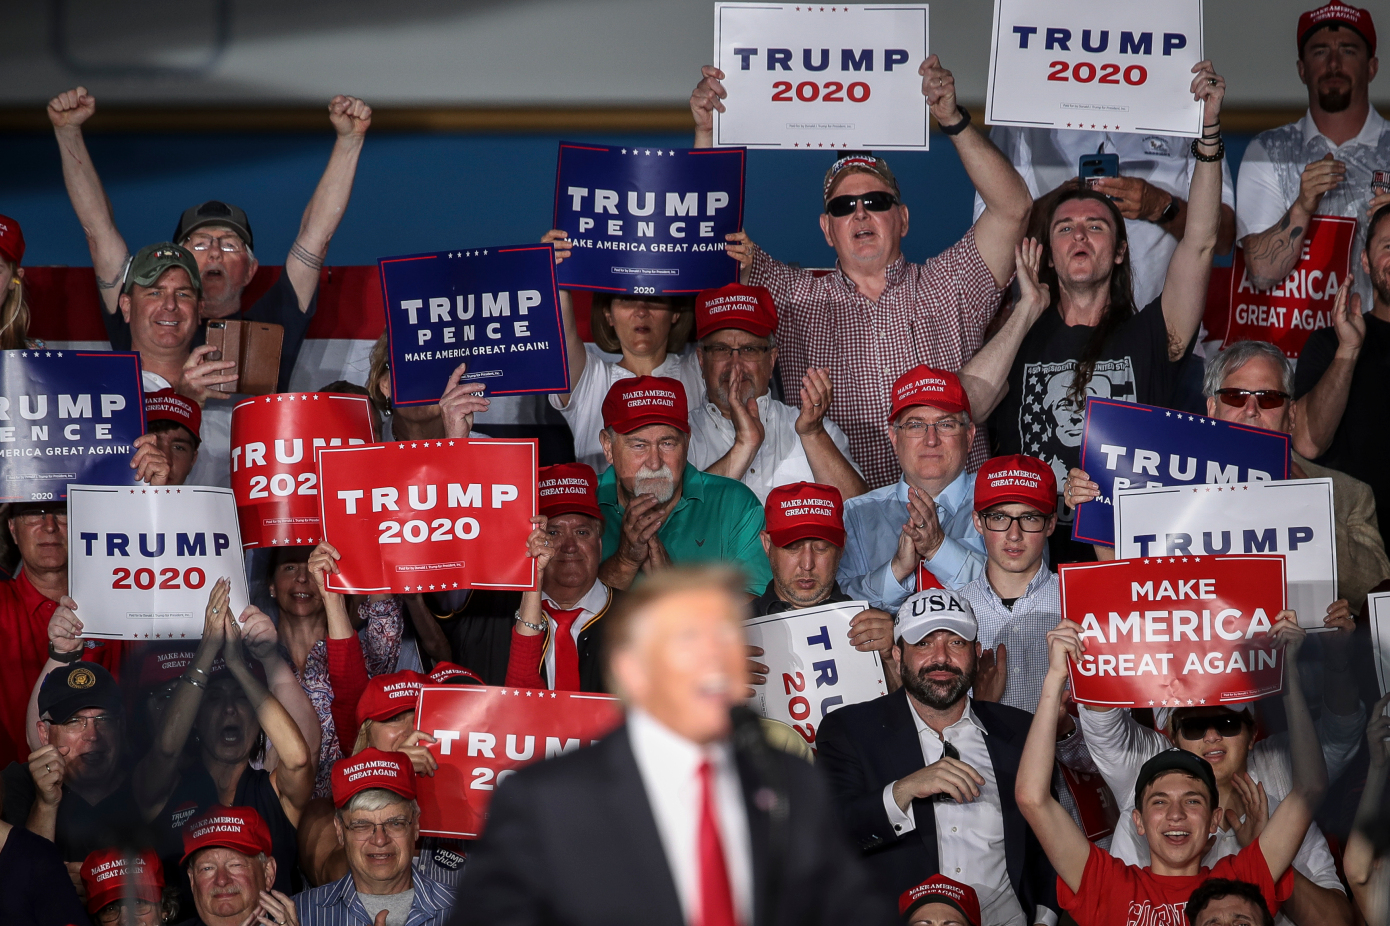 MONTOURSVILLE, PA - MAY 20: The crowd cheers as U.S. President Donald Trump speaks during a 'Make America Great Again' campaign rally at Williamsport Regional Airport, May 20, 2019 in Montoursville, Pennsylvania. Trump is making a trip to the swing state to drum up Republican support on the eve of a special election in Pennsylvania's 12th congressional district, with Republican Fred Keller facing off against Democrat Marc Friedenberg. (Photo by Drew Angerer/Getty Images)